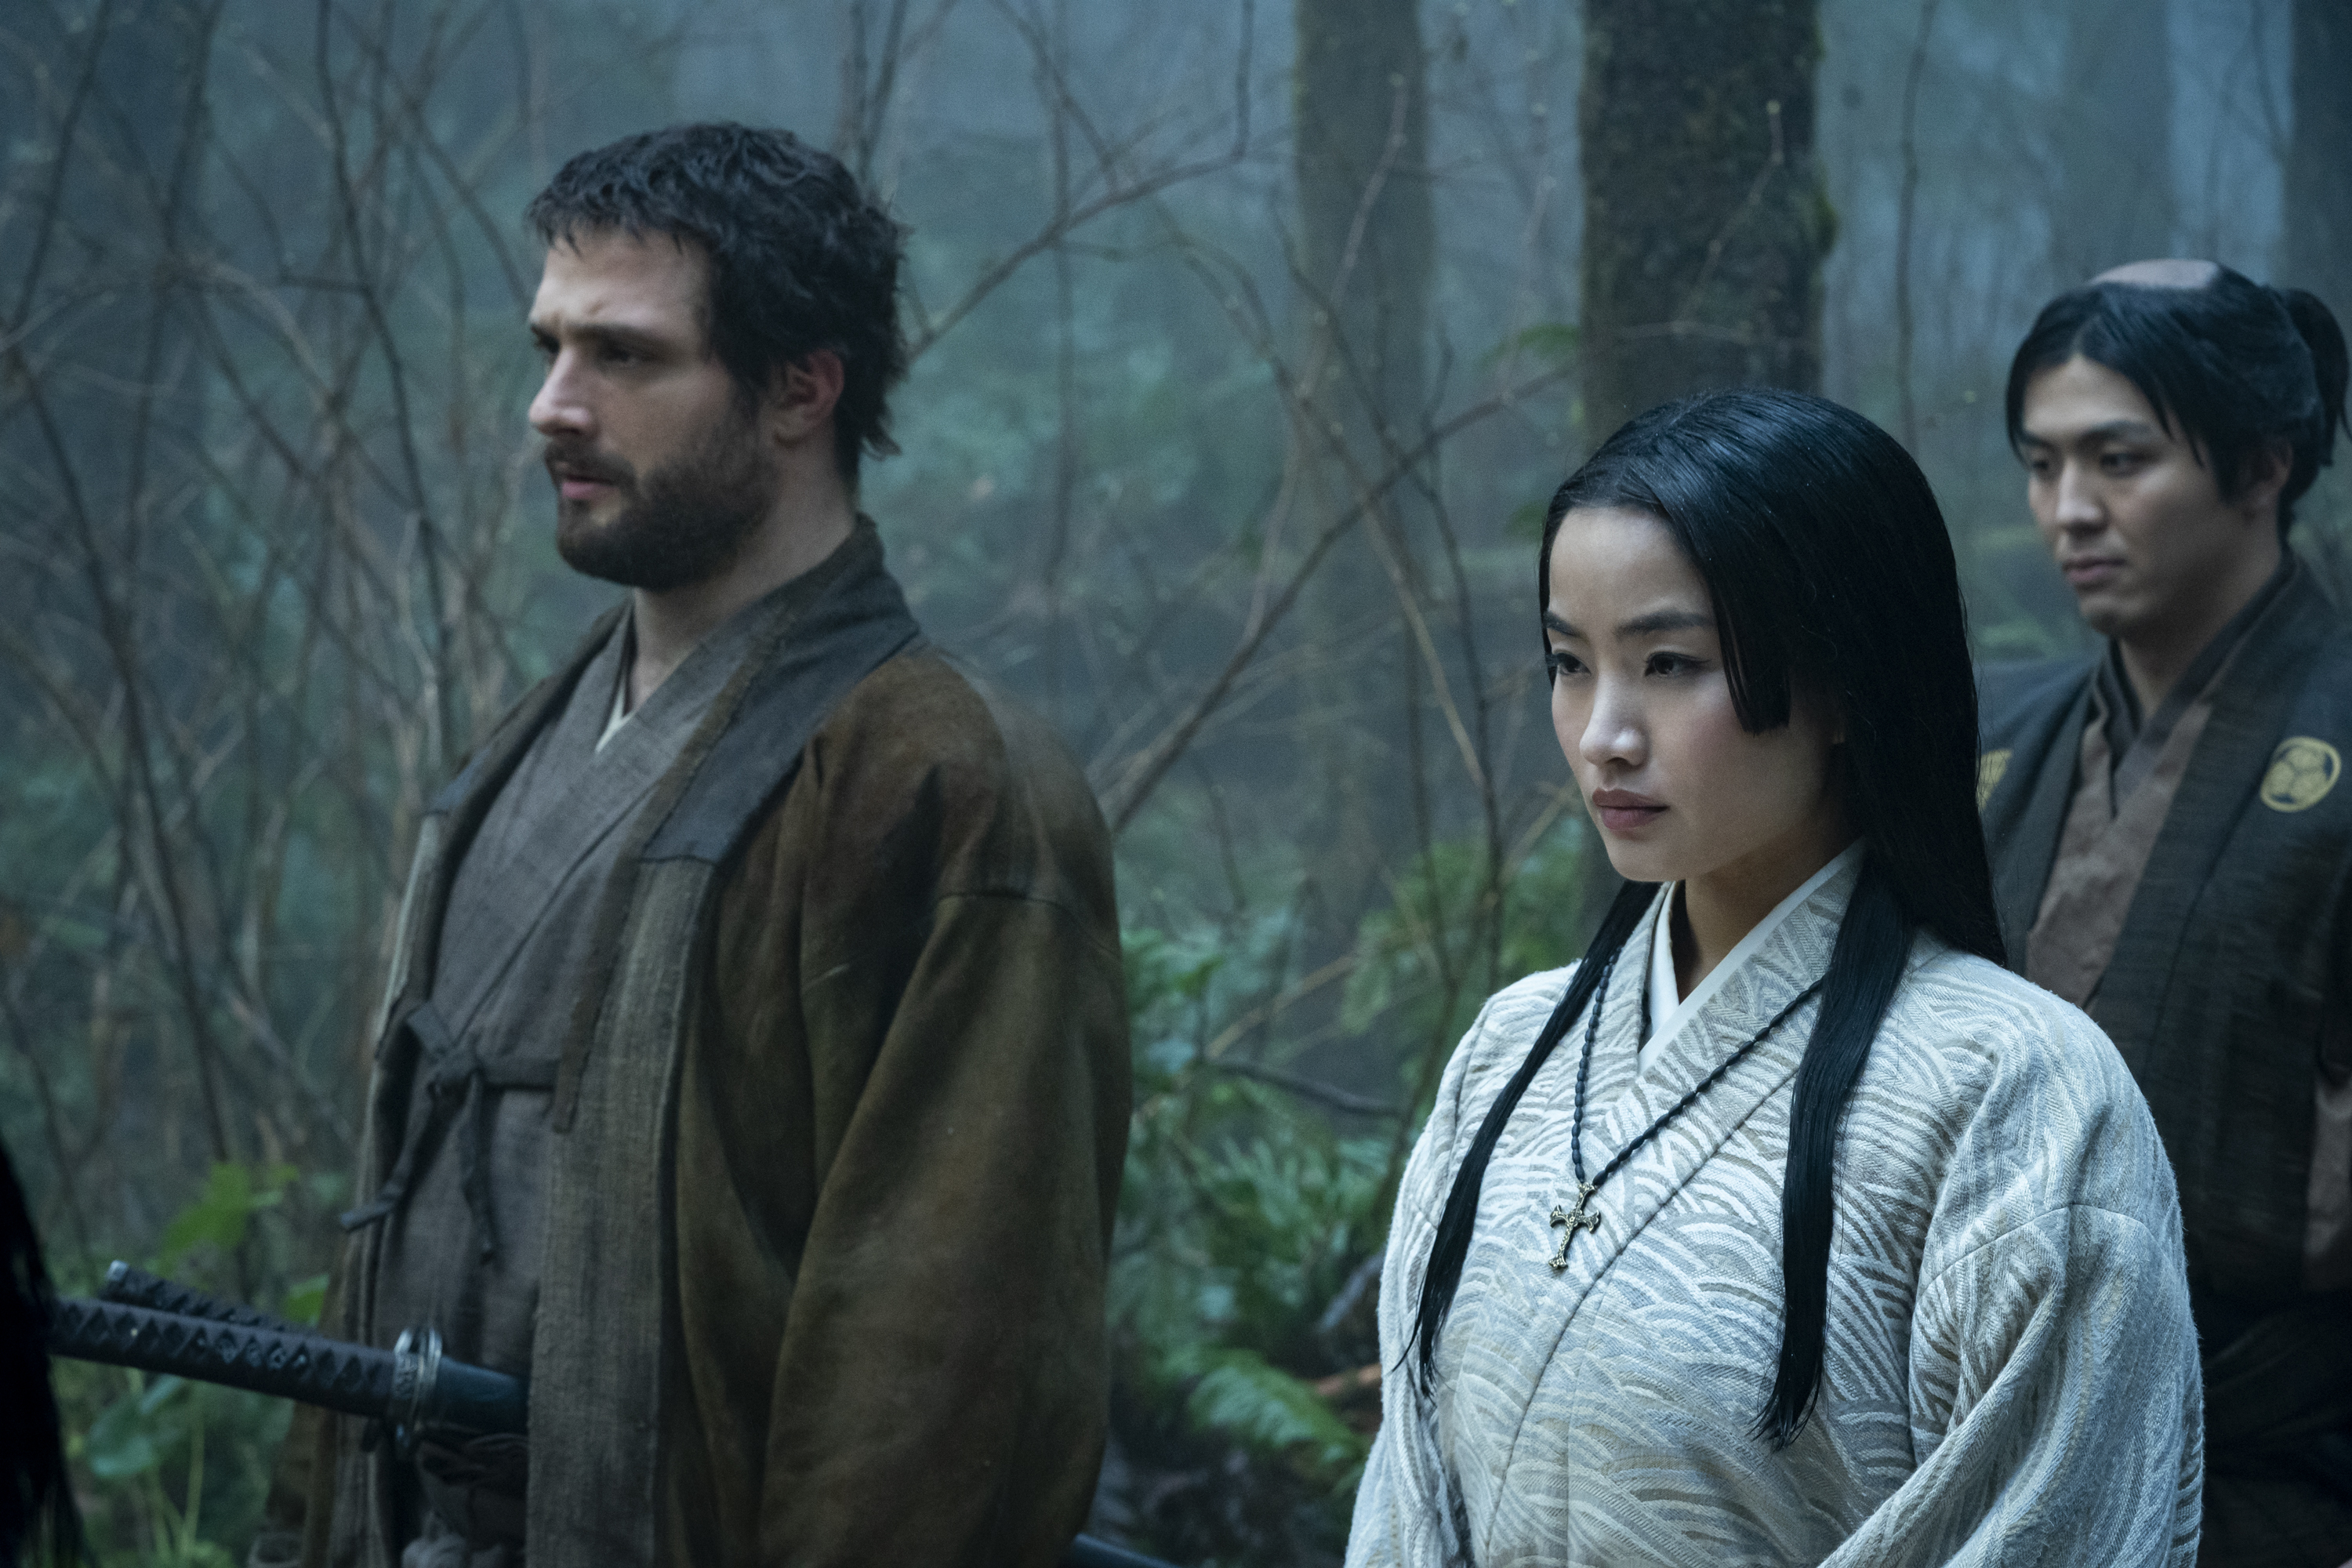 cosmo jarvis as john blackthorne and anna sawai as toda mariko, standing in the woods with a young soldier (right), in shogun